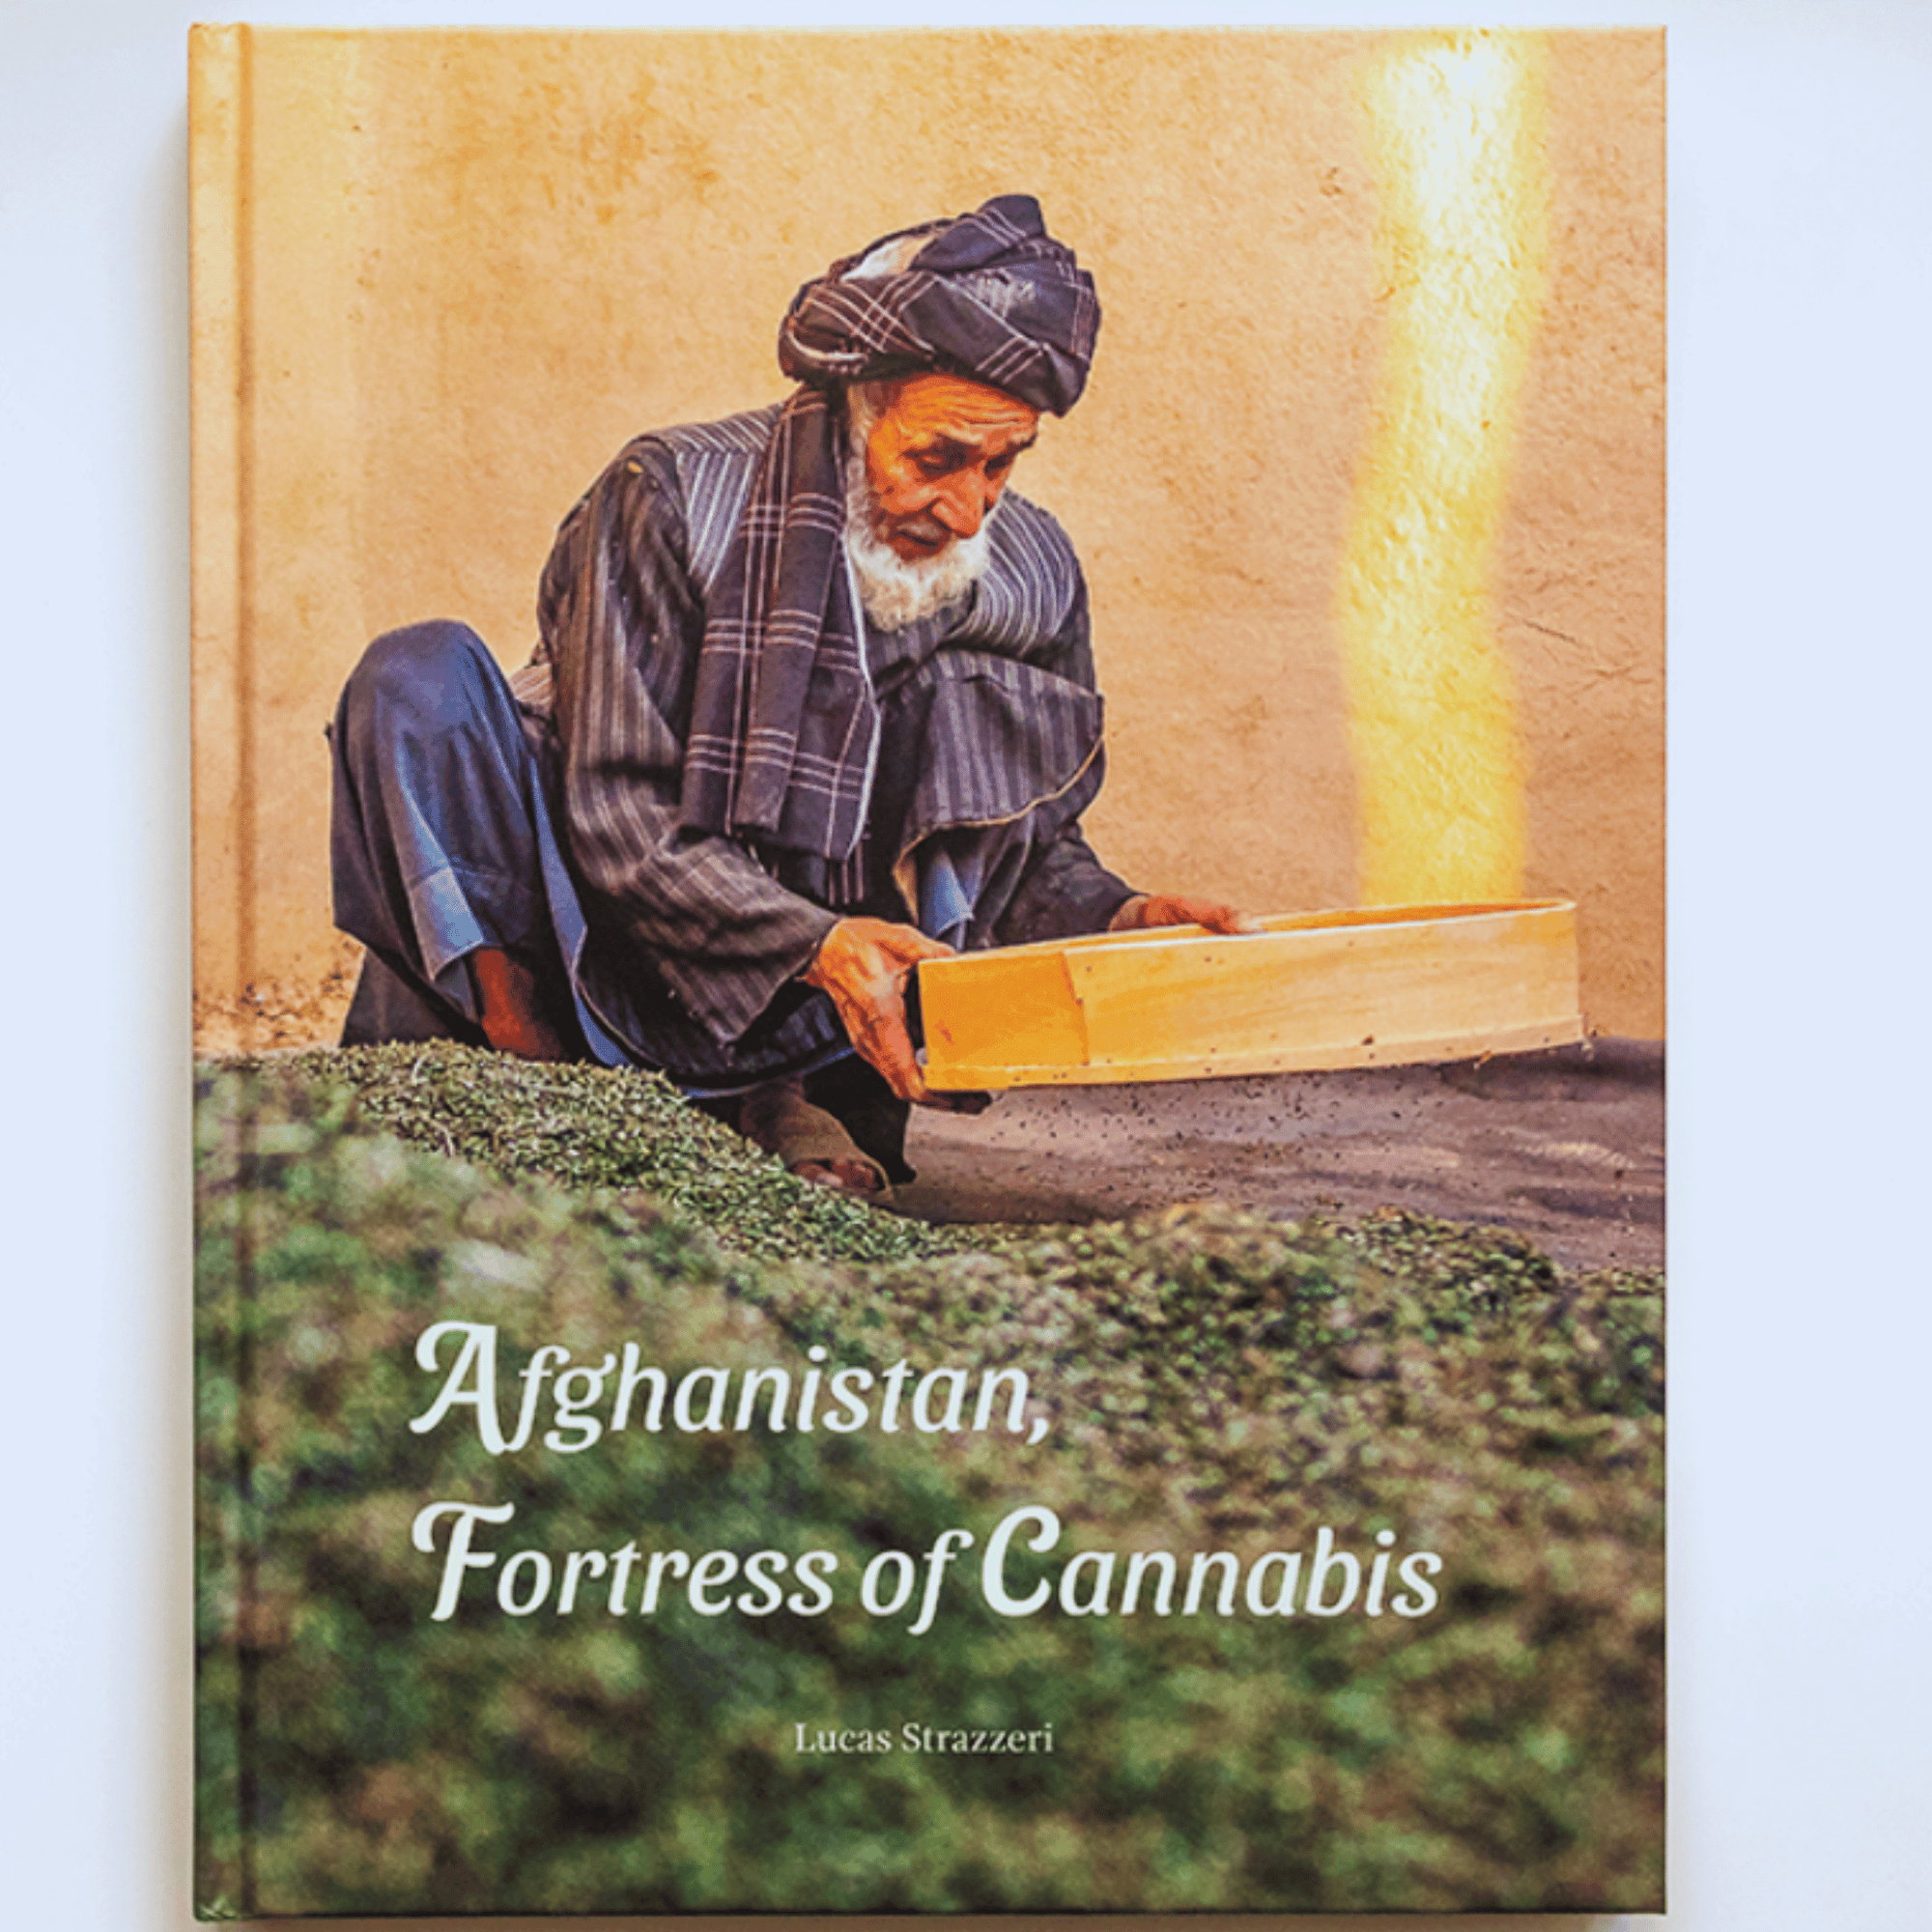 Photography Book "Afghanistan, Fortress of Cannabis - The Cannabis Company